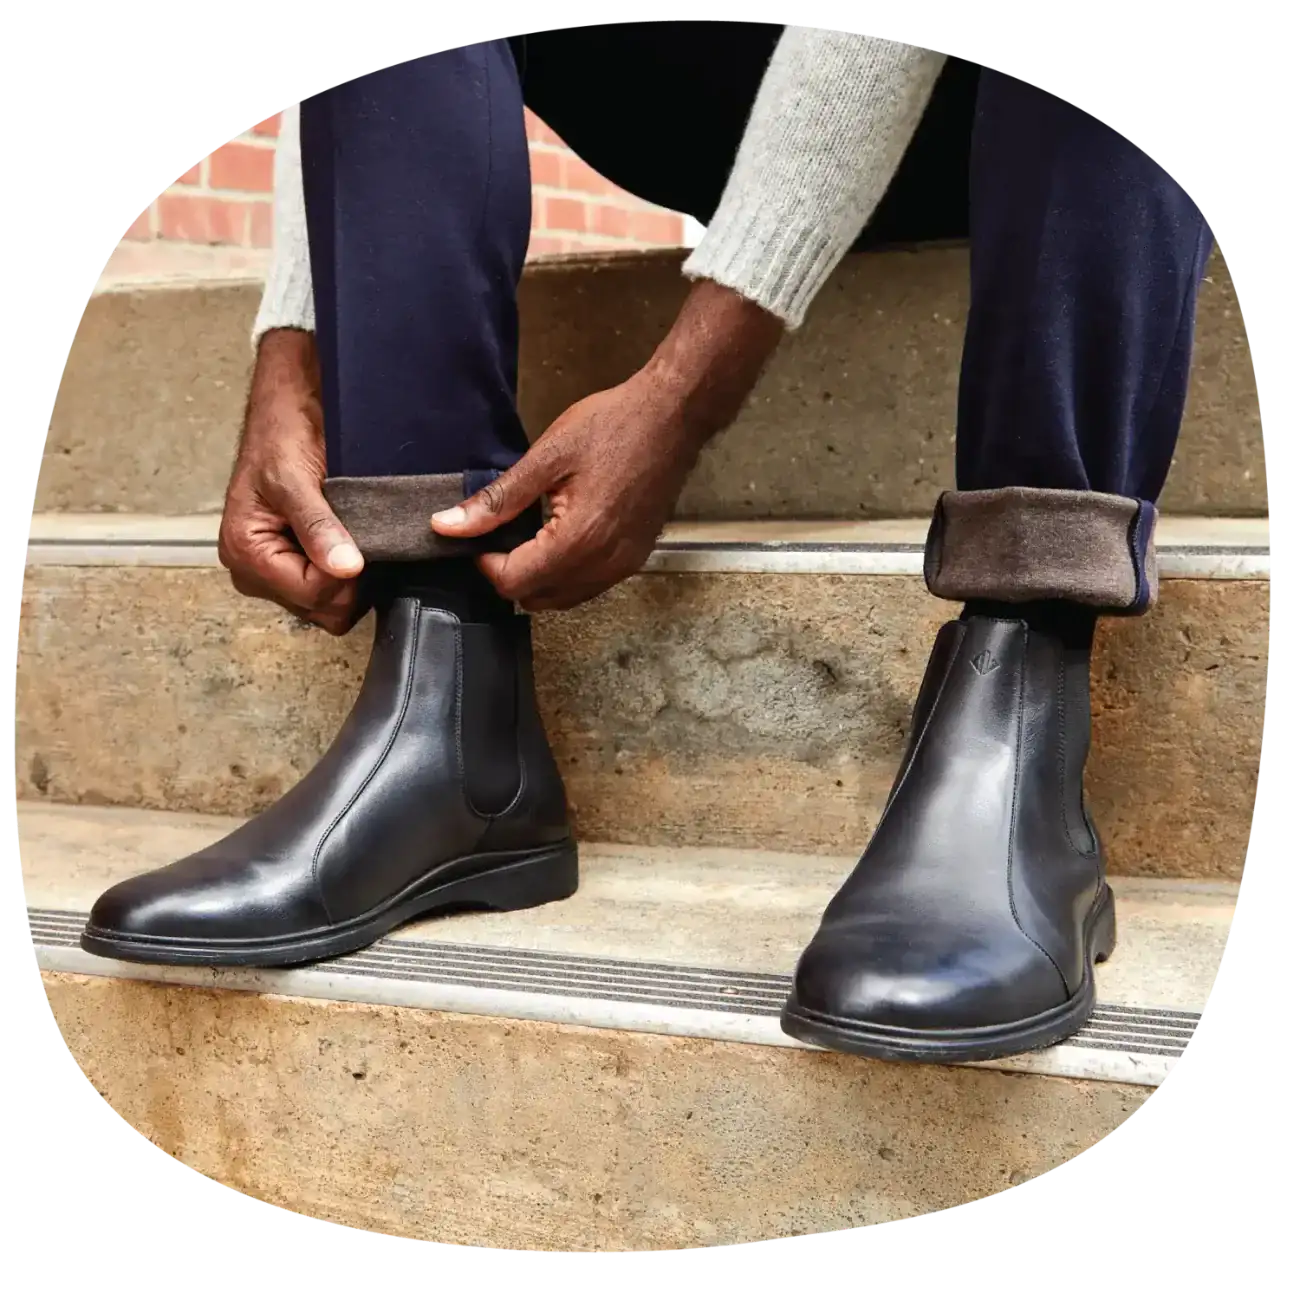  A person fixing their pant leg wearing men’s dress shoes with arch support from Amberjack